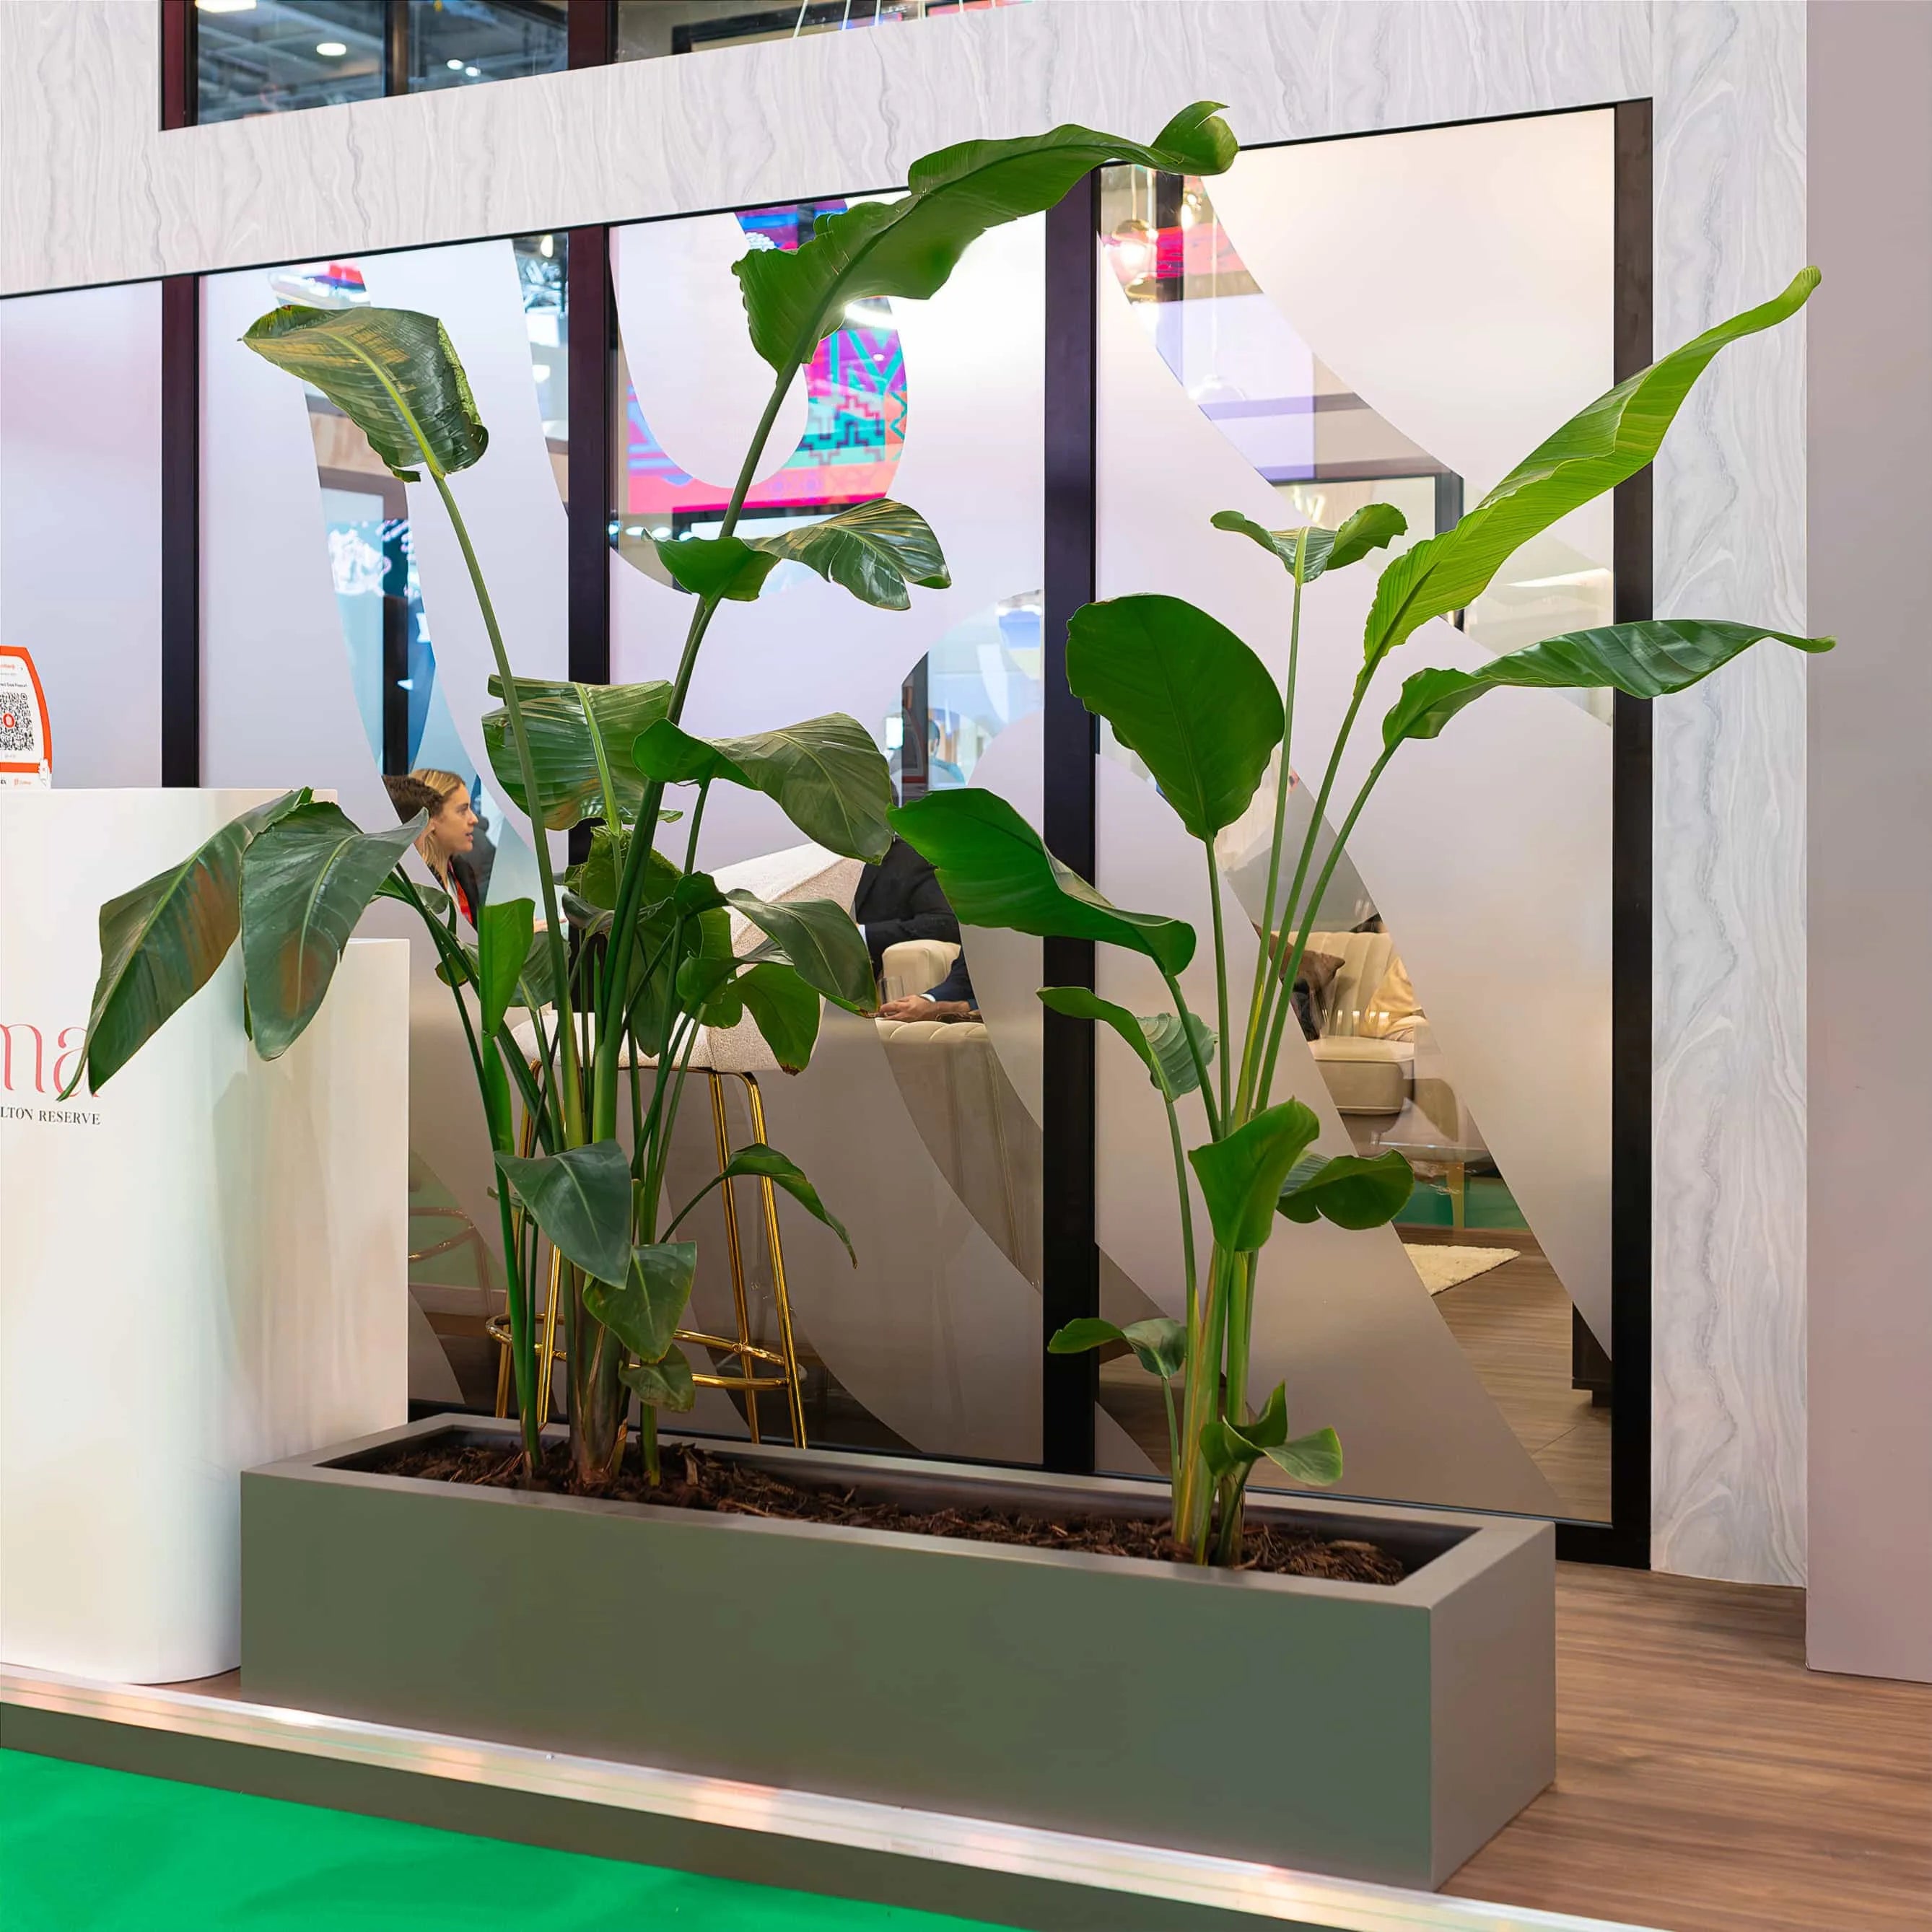 Elegant Monstera plants add a touch of verdant luxury to the modern event booth with their lush green leaves - Plant Hire by Event Florist Amaranté London.